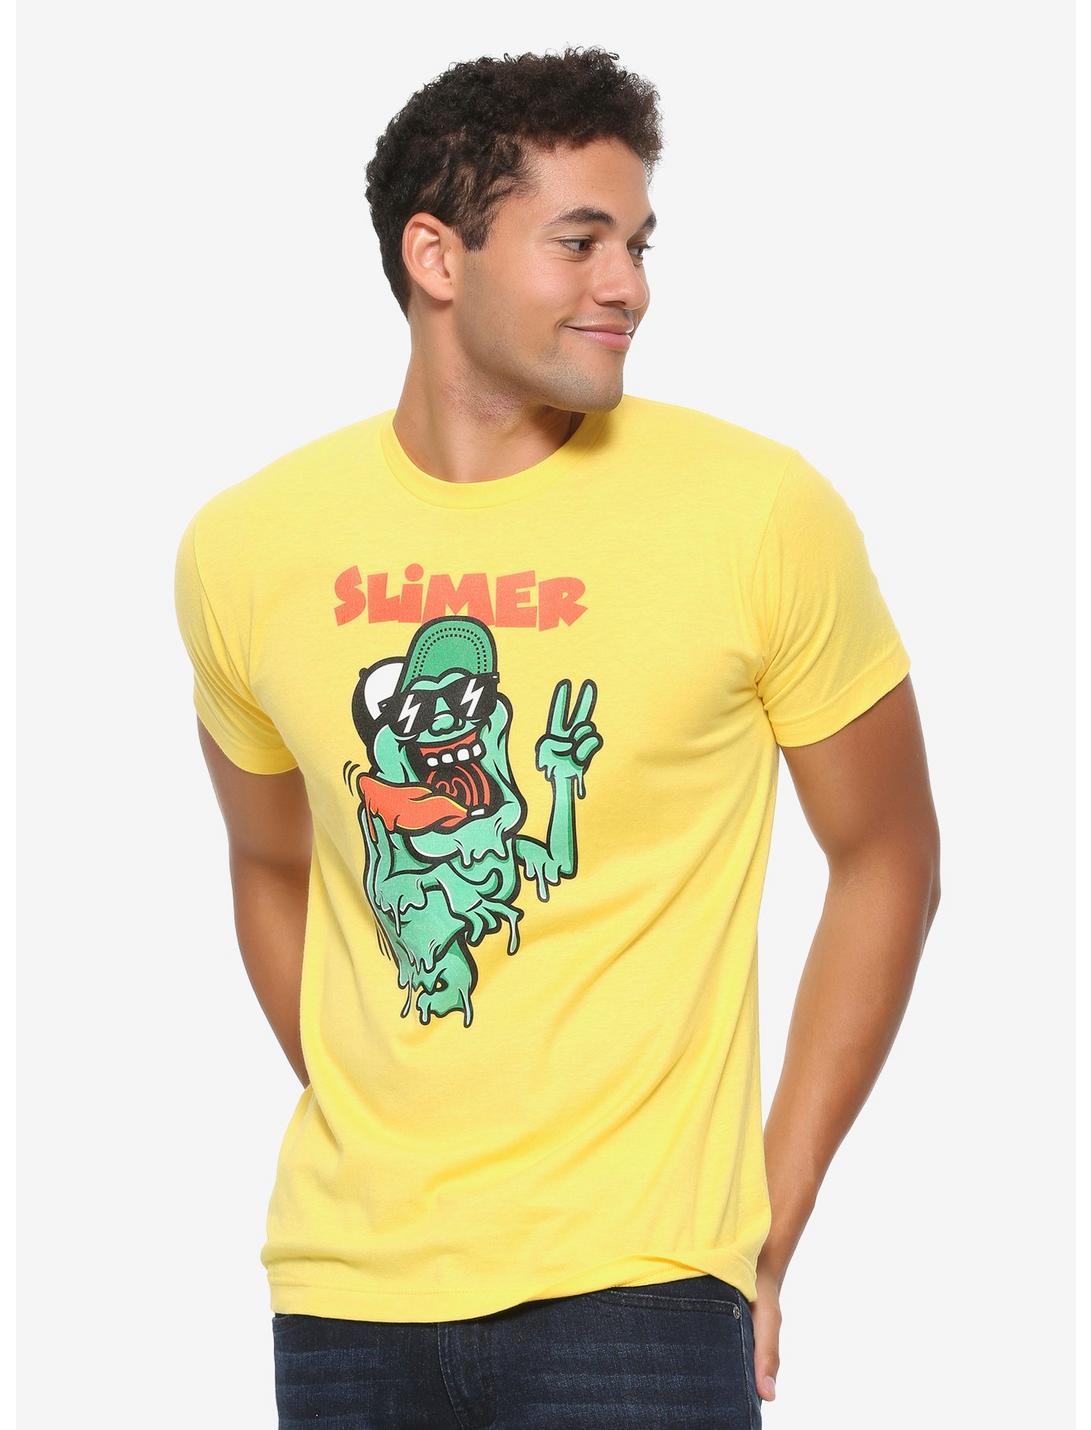 Ghostbusters Slimer T-Shirt - BoxLunch Exclusive, YELLOW, hi-res